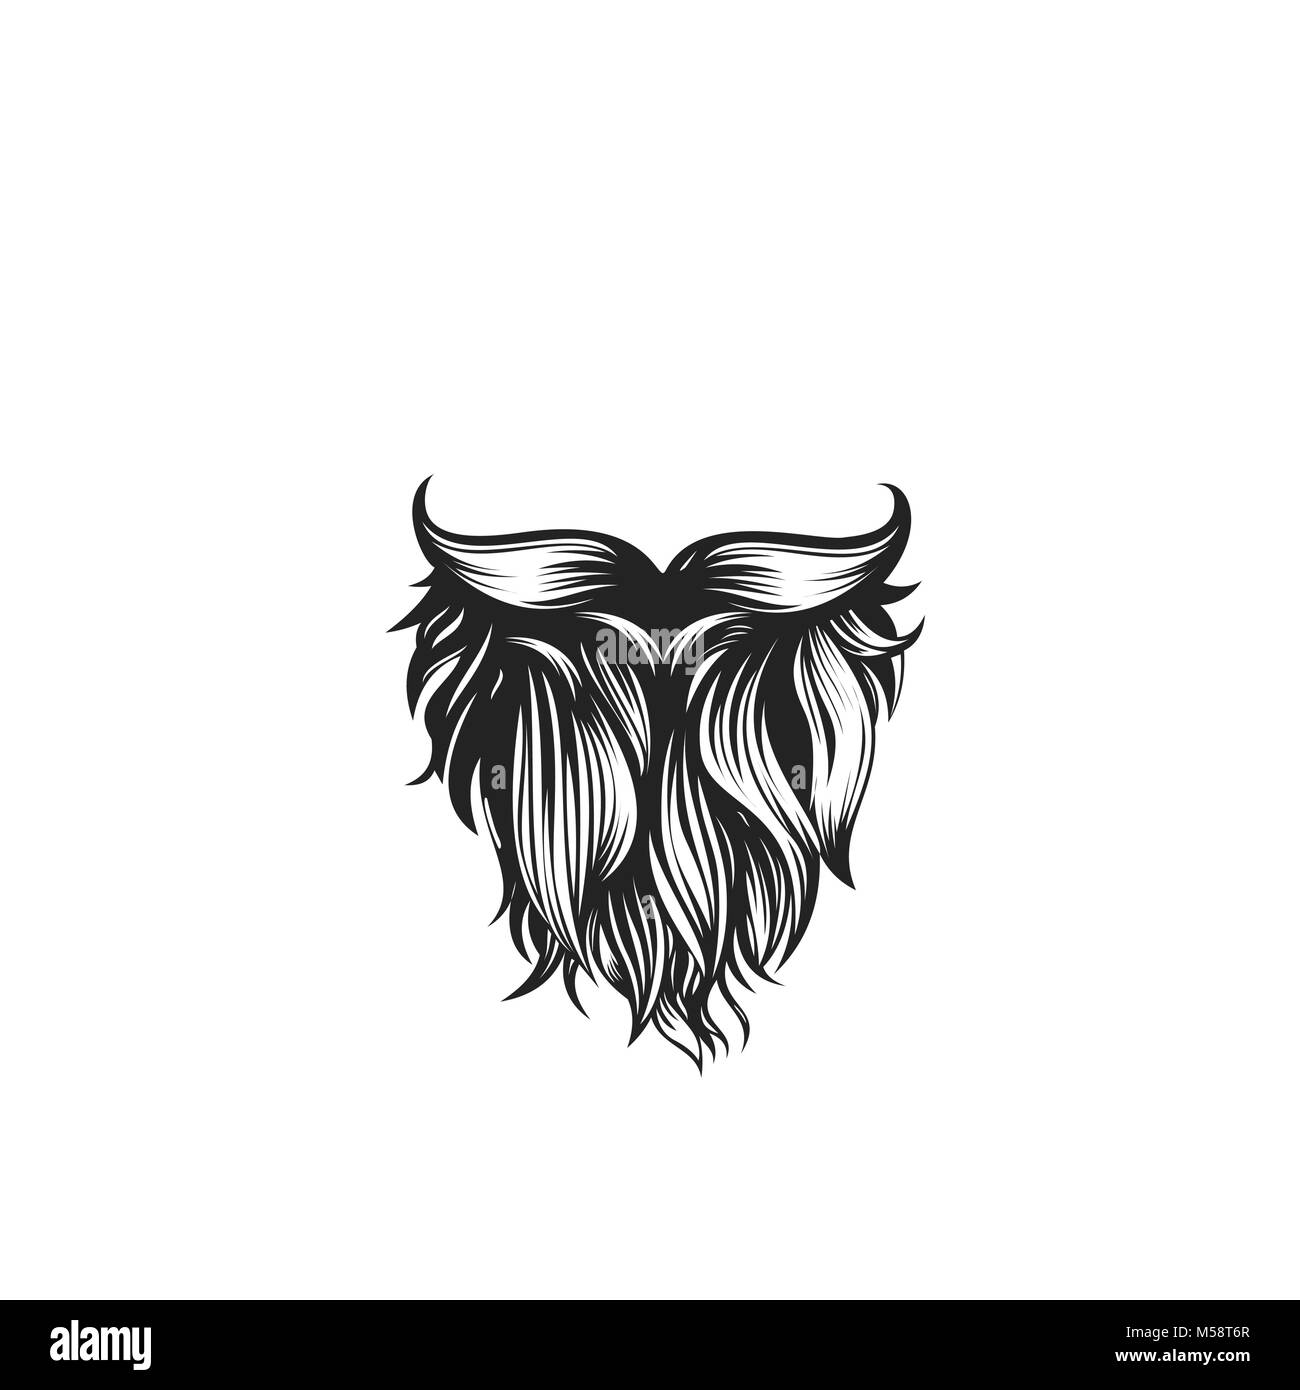 Black curly beard with mustache vector illustration. Stock Vector